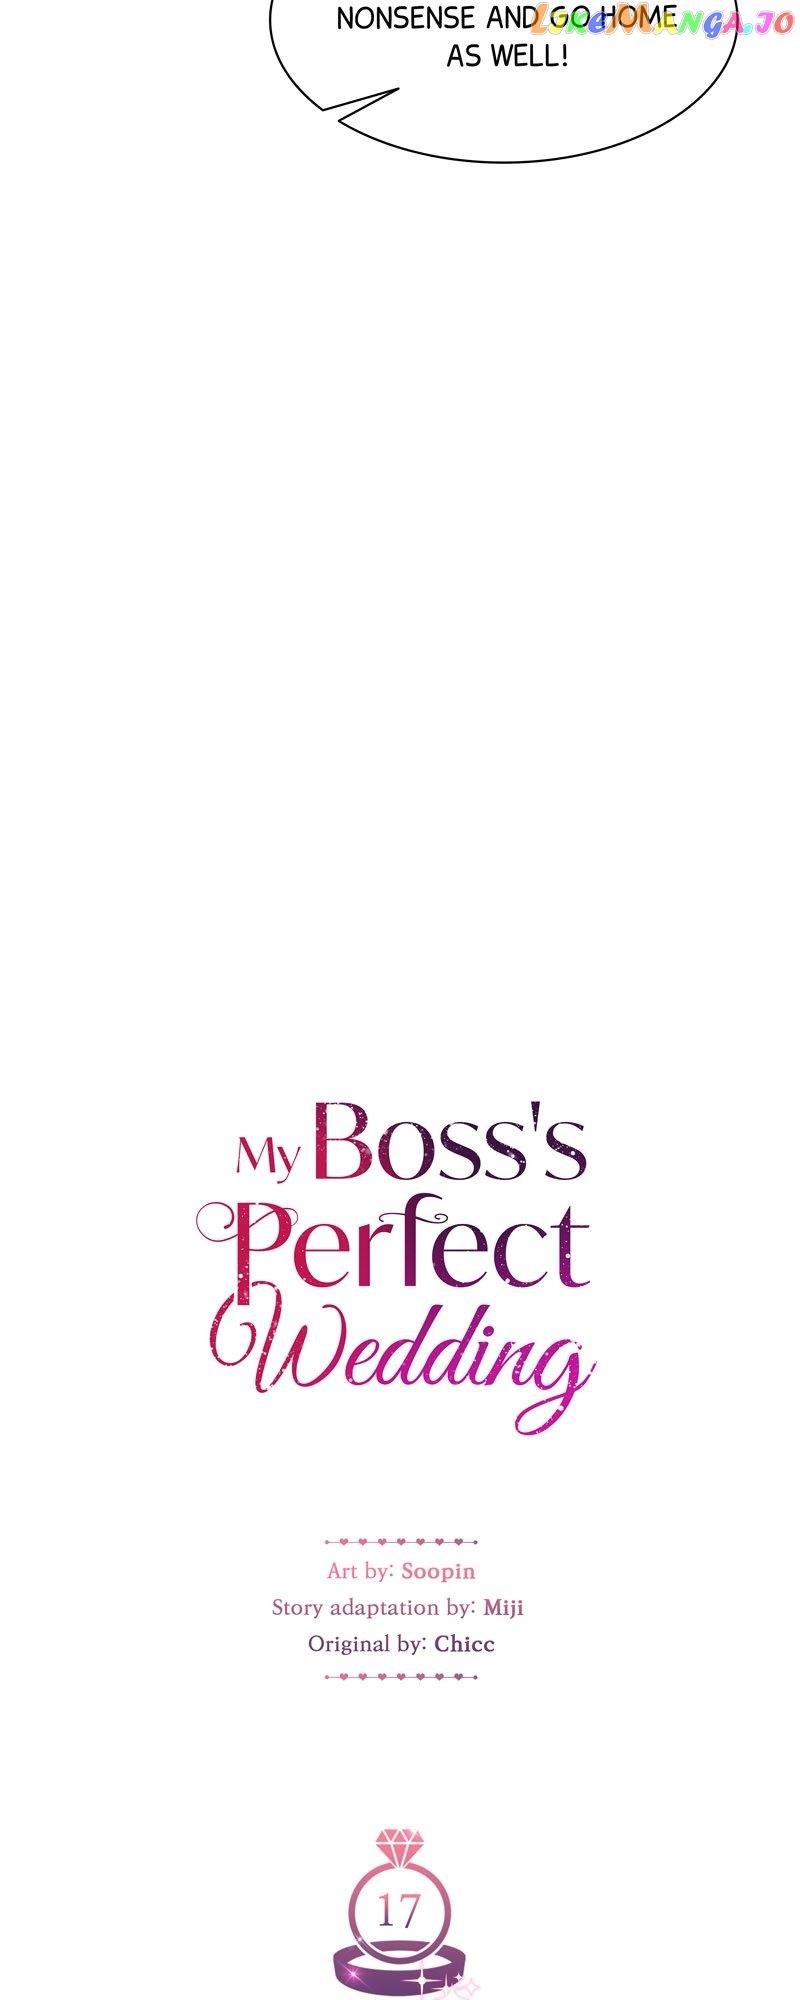 My Bosss’s Perfect Wedding chapter 17